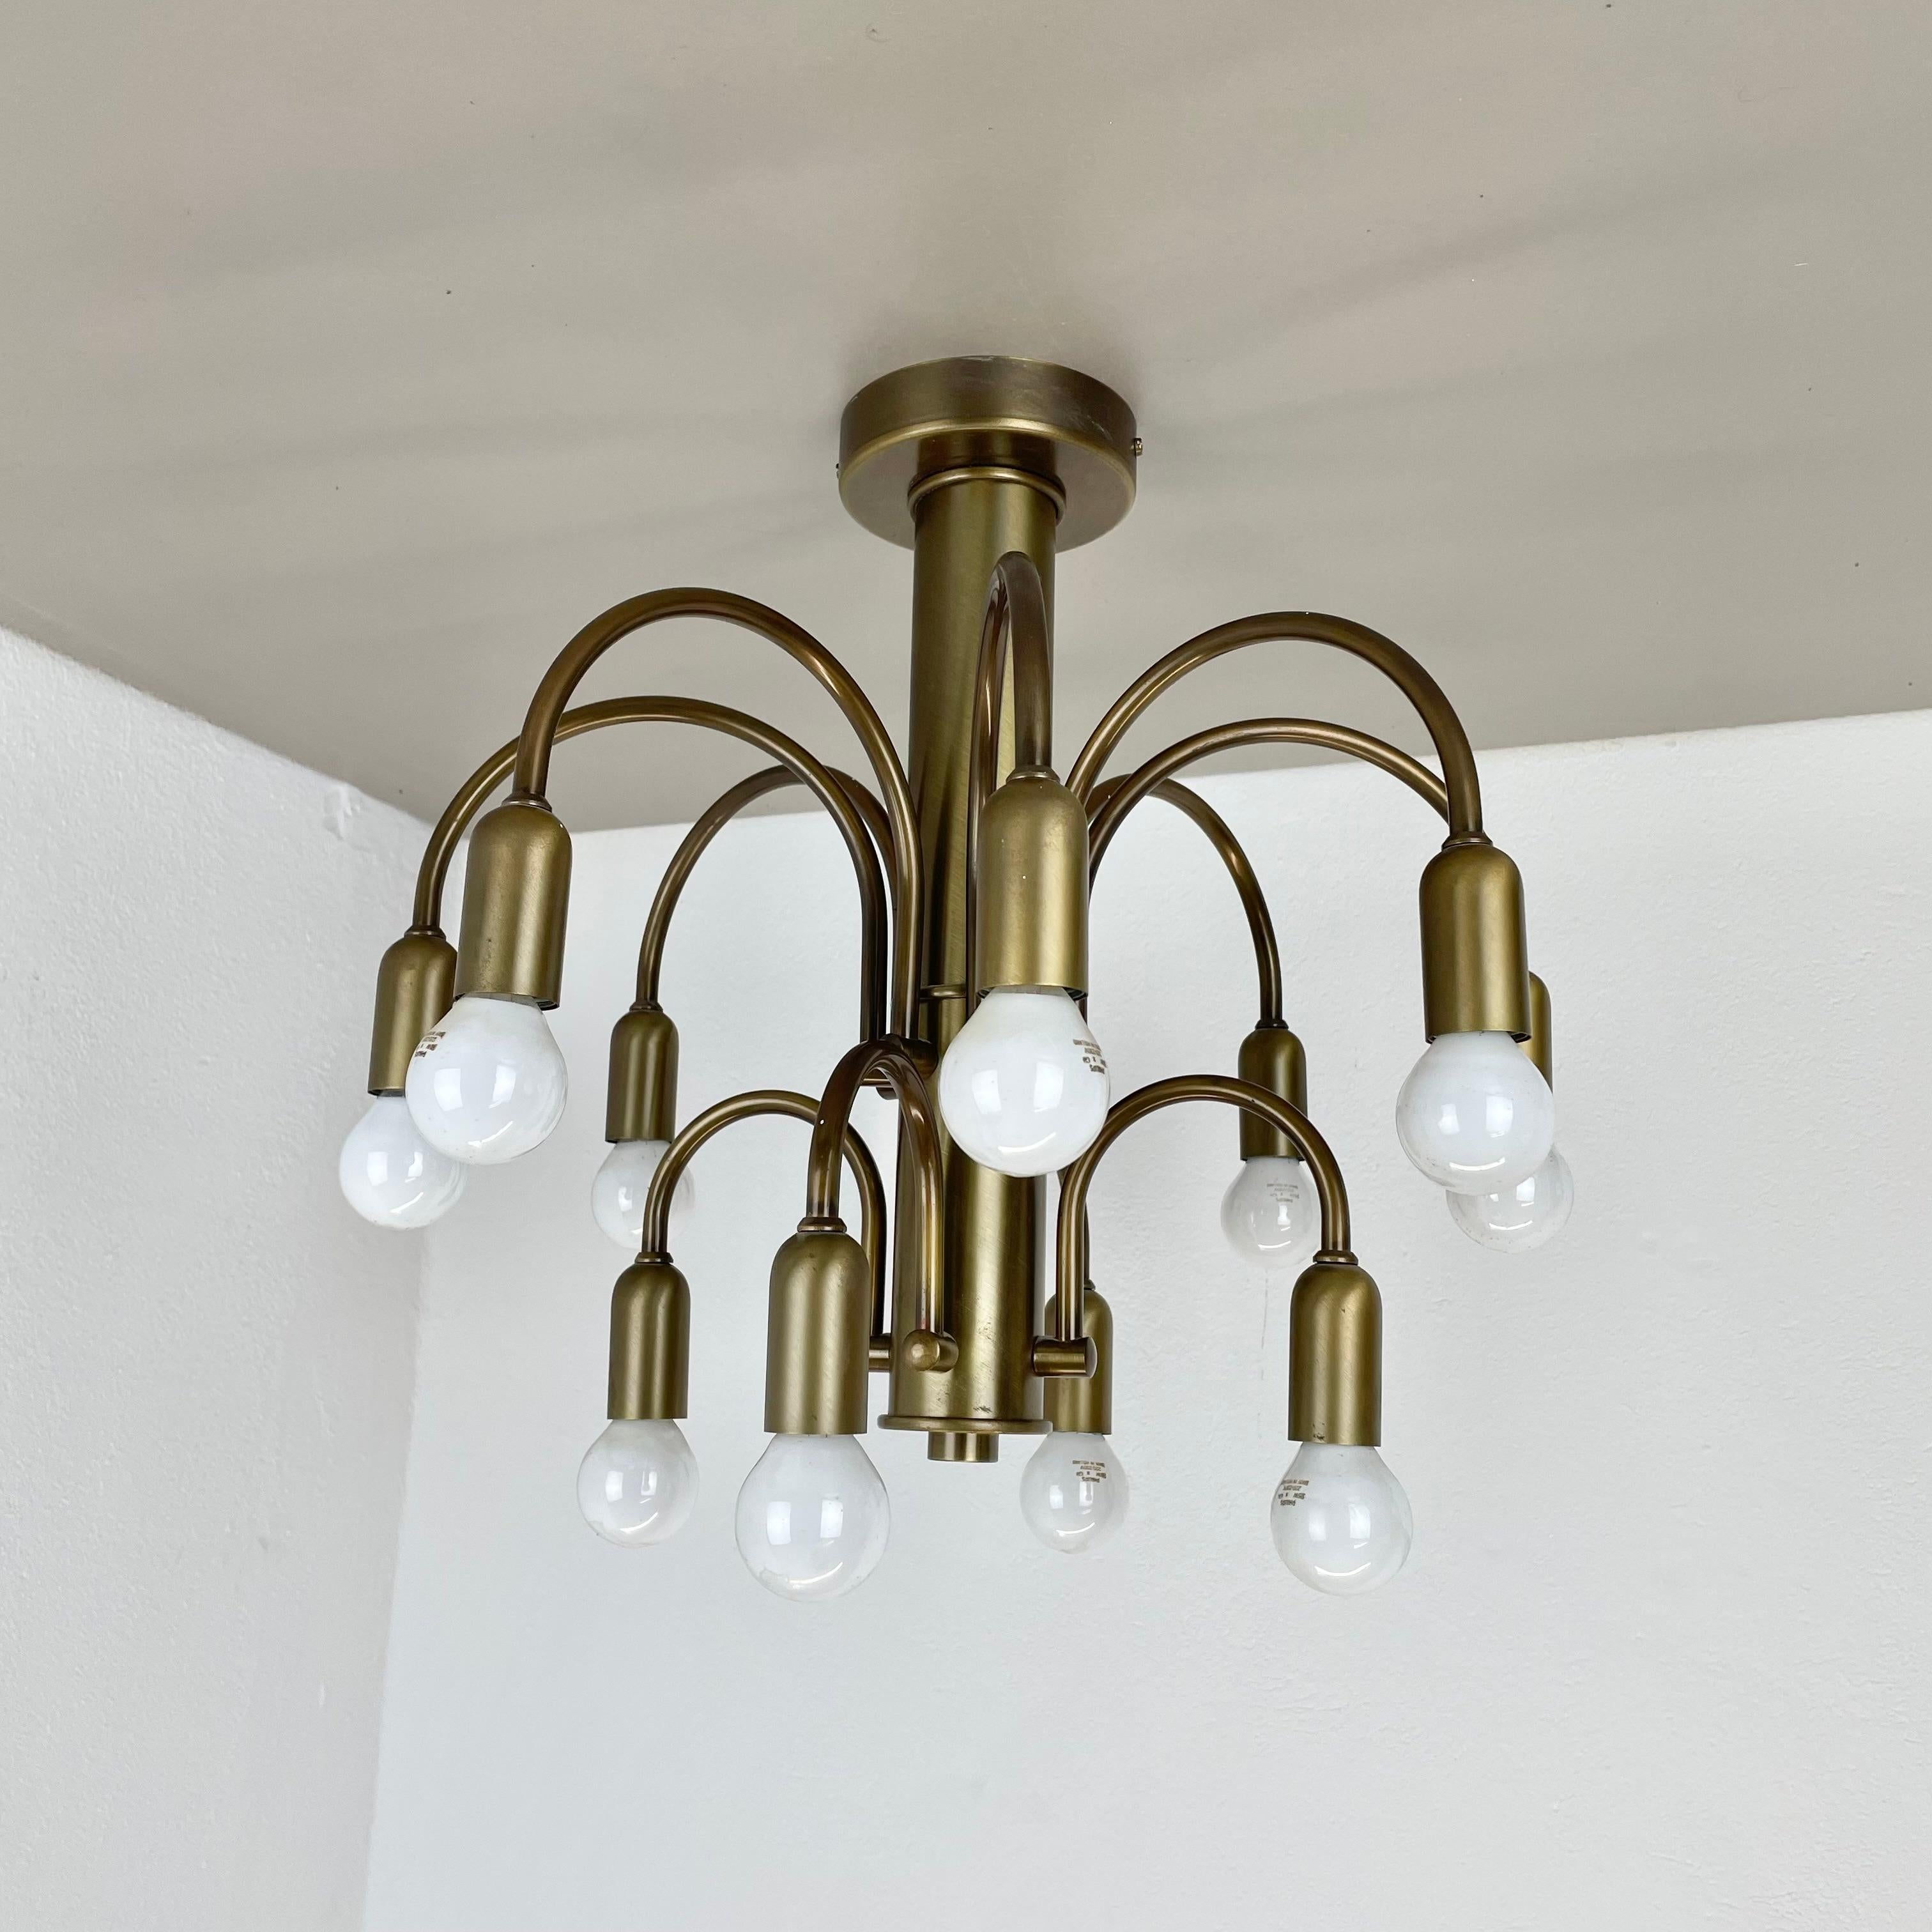 Article:

brass ceiling light



Origin:

Germany



Age:

1970s



This vintage modernist light was produced in the 1970s in Germany by WKR Leuchten. The lights is made of metal and solid brass with 12 looped light arm and sockets fixed on the